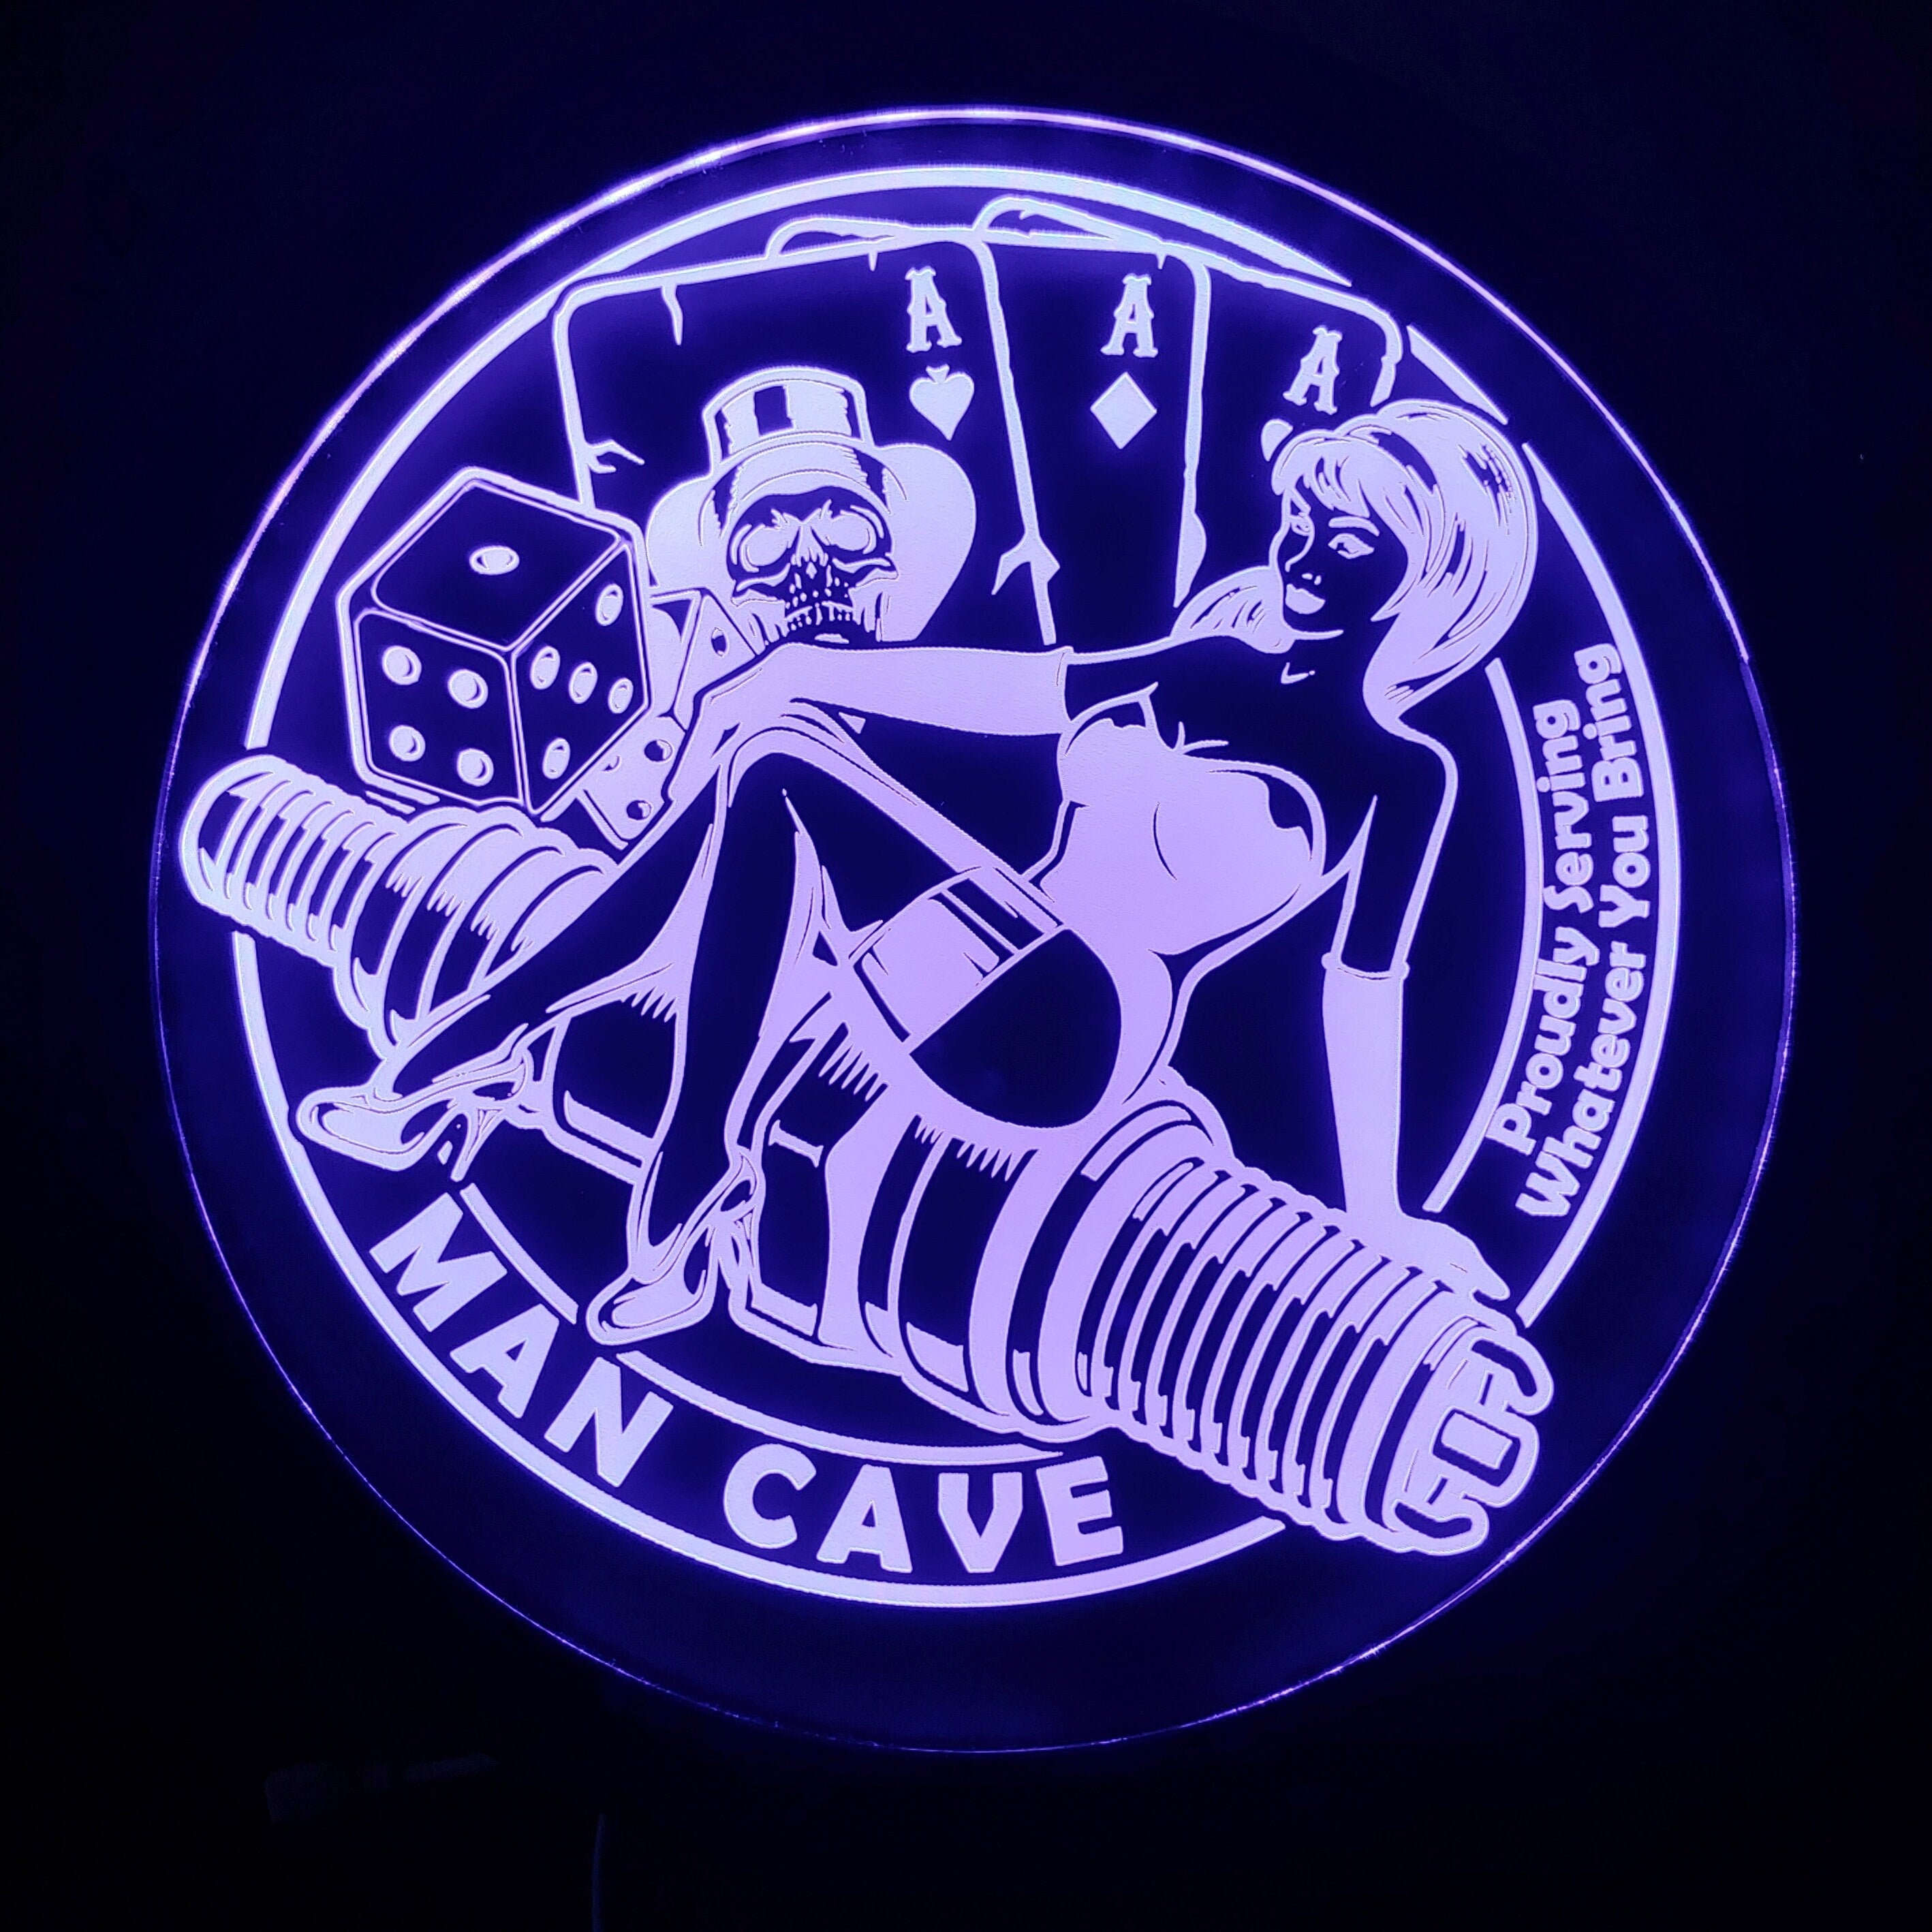 Man Cave LED Wall Sign Neon Like - Color Changing Remote Control - 6 Sizes Made in USA Free Shipping